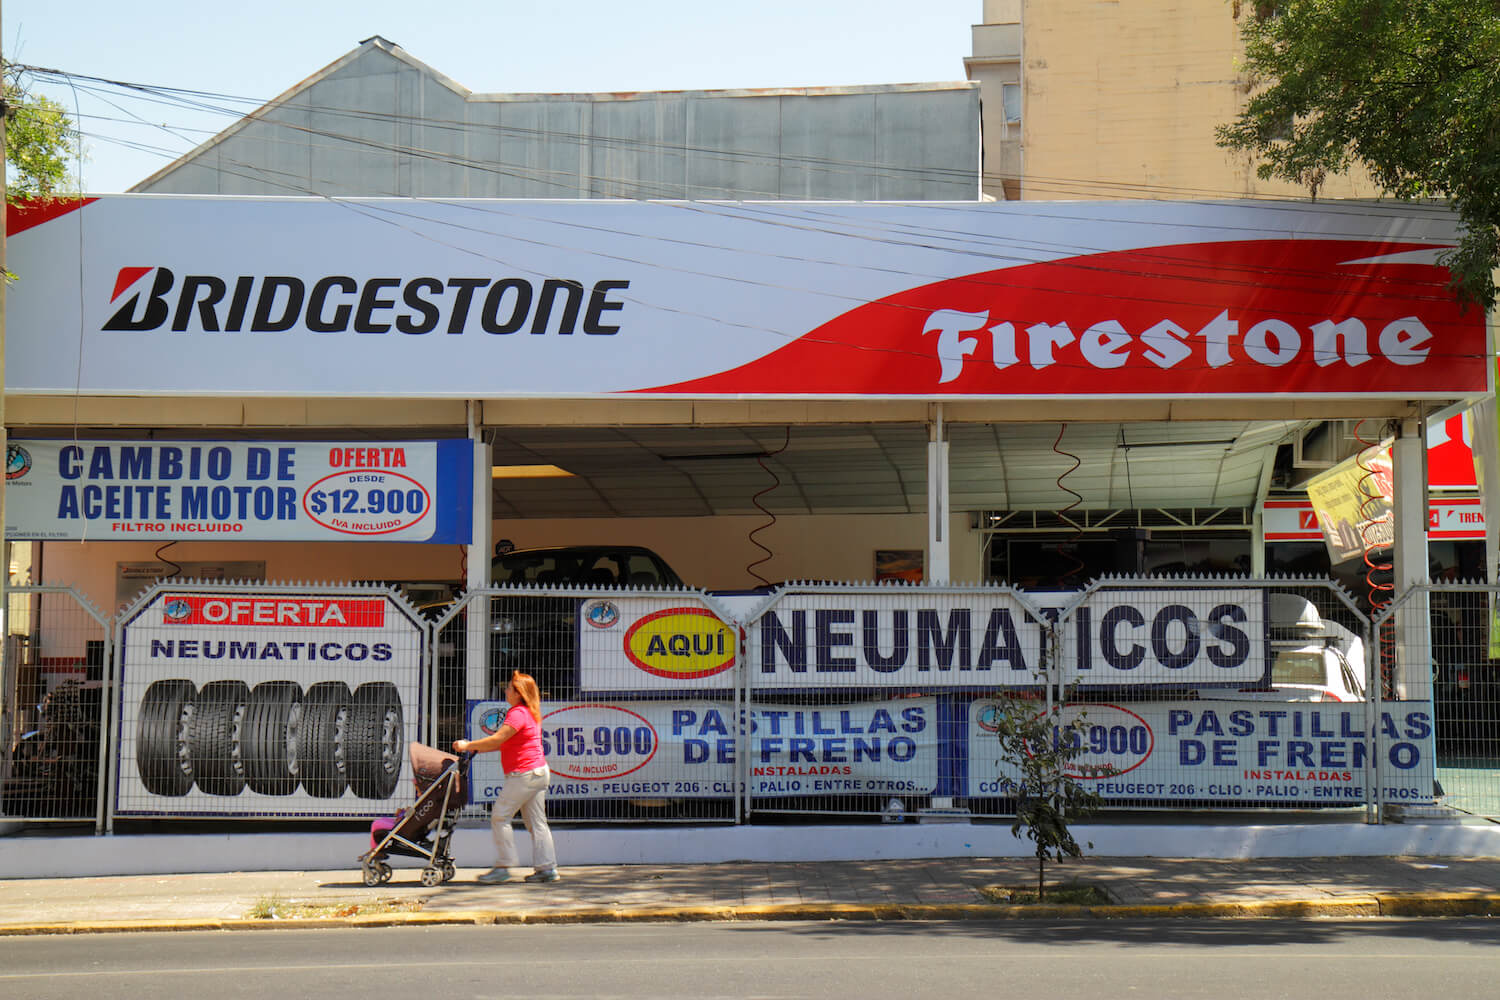 Are Tires Plus And Firestone The Same Company